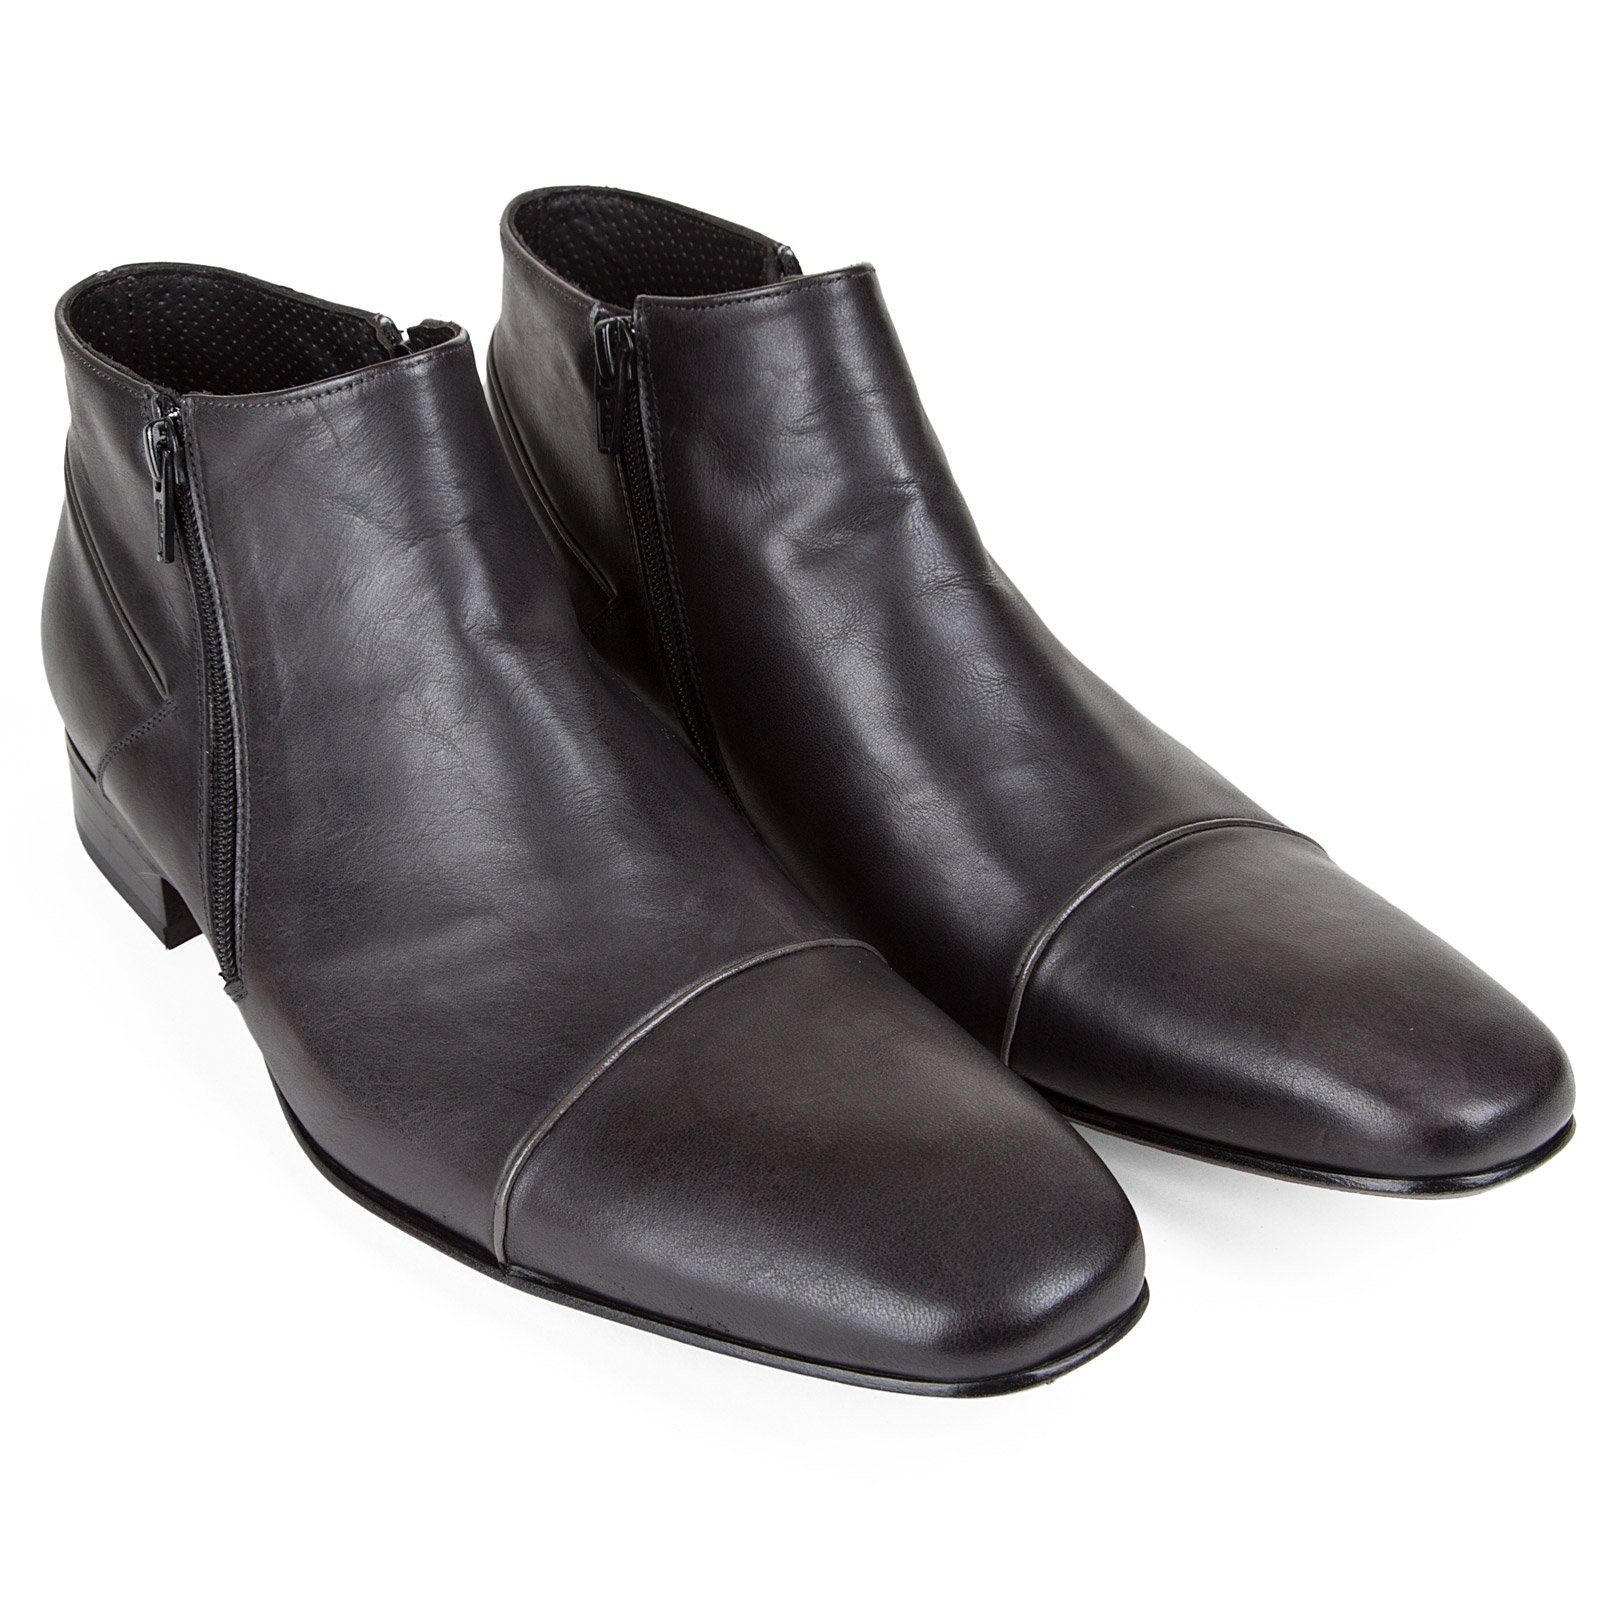 Pablo Olympia Double Zip Boots - Shoes & Boots-Dress Shoes : Fifth ...